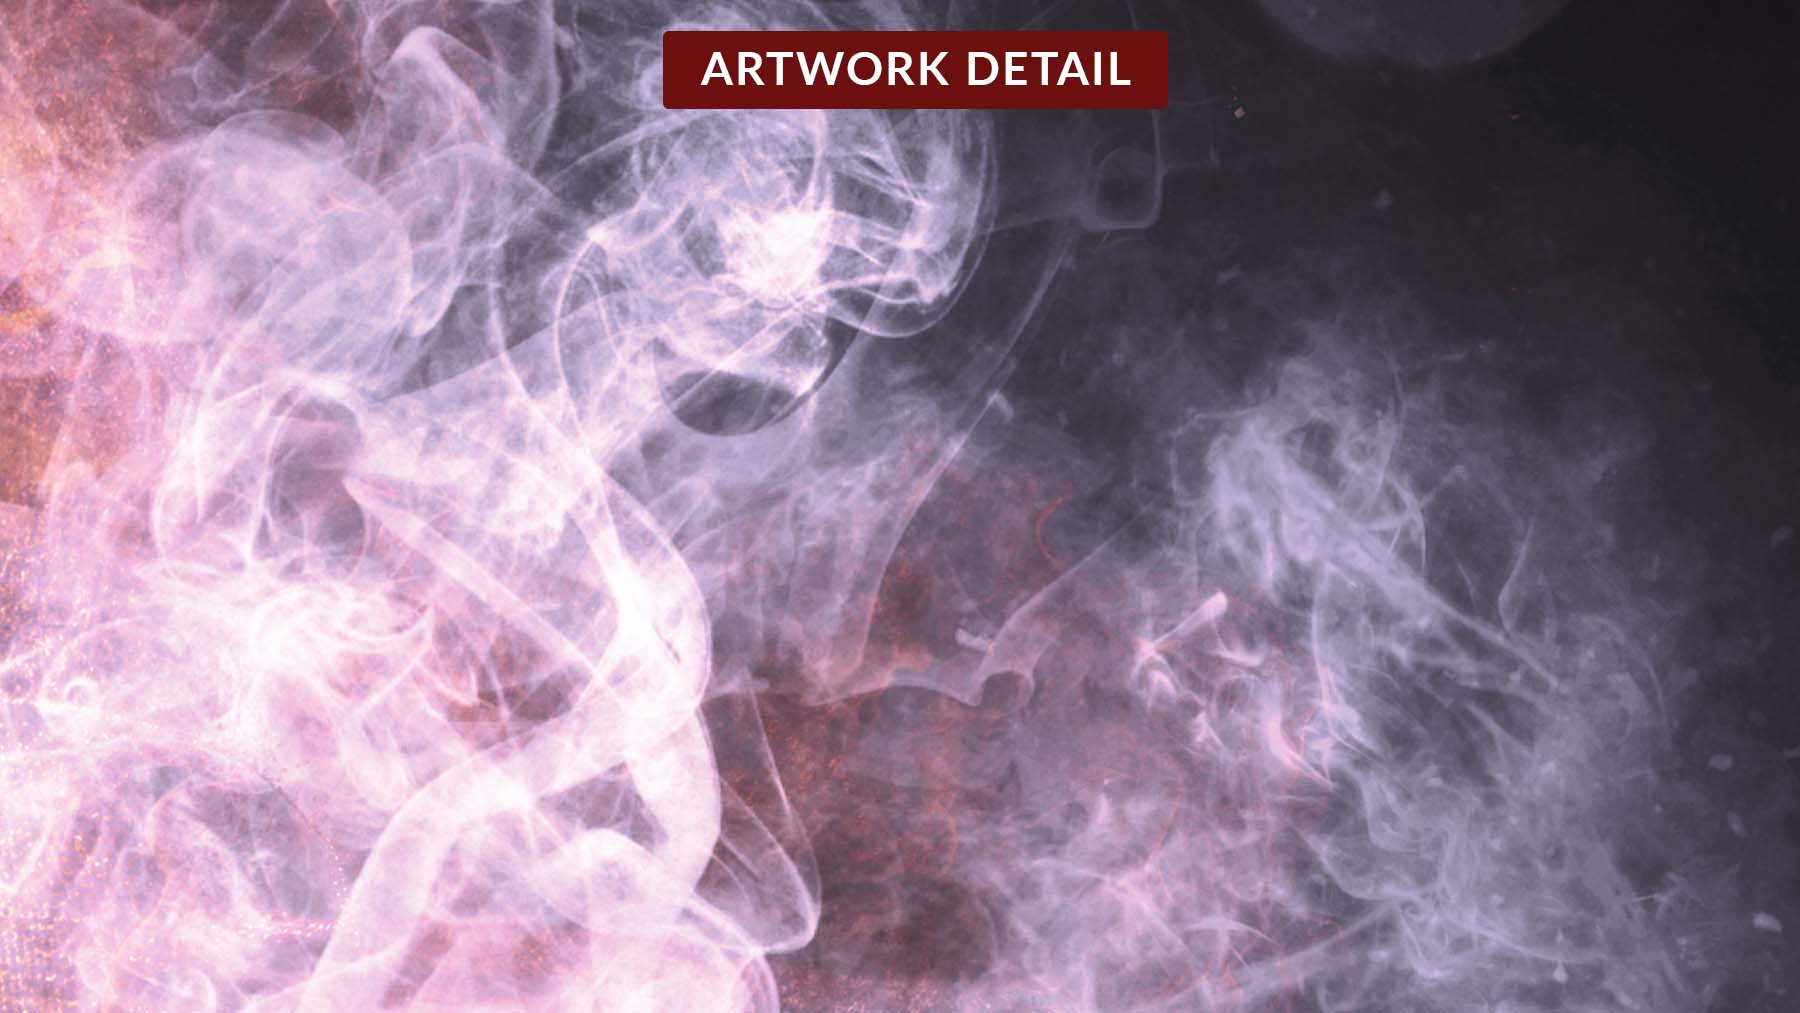 Detail of cigar smoke from the You Reek of Fear NFT collectible artwork